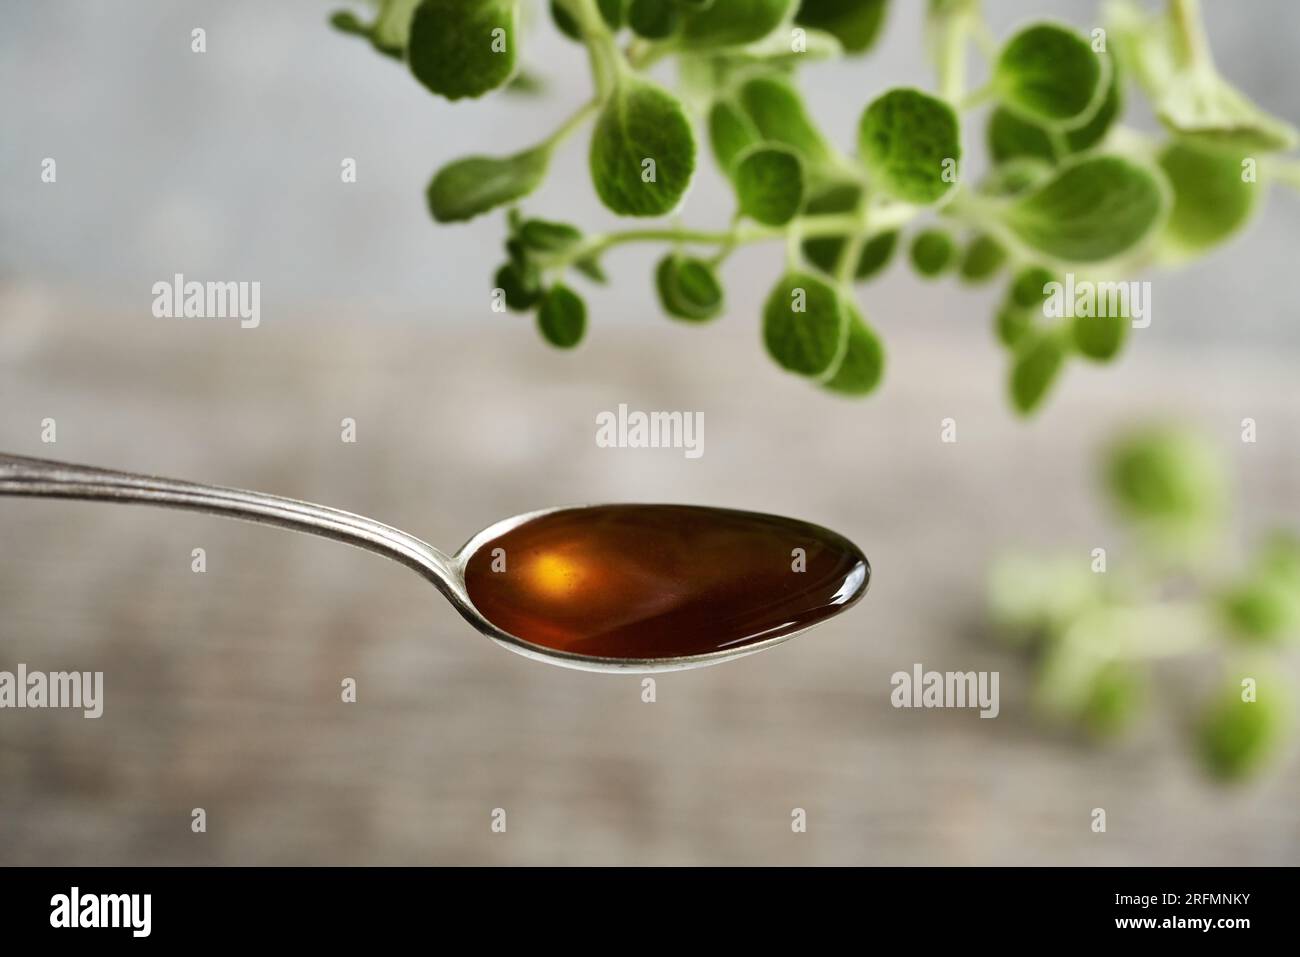 Plectranthus amboinicus syrup on a metal spoon Stock Photo